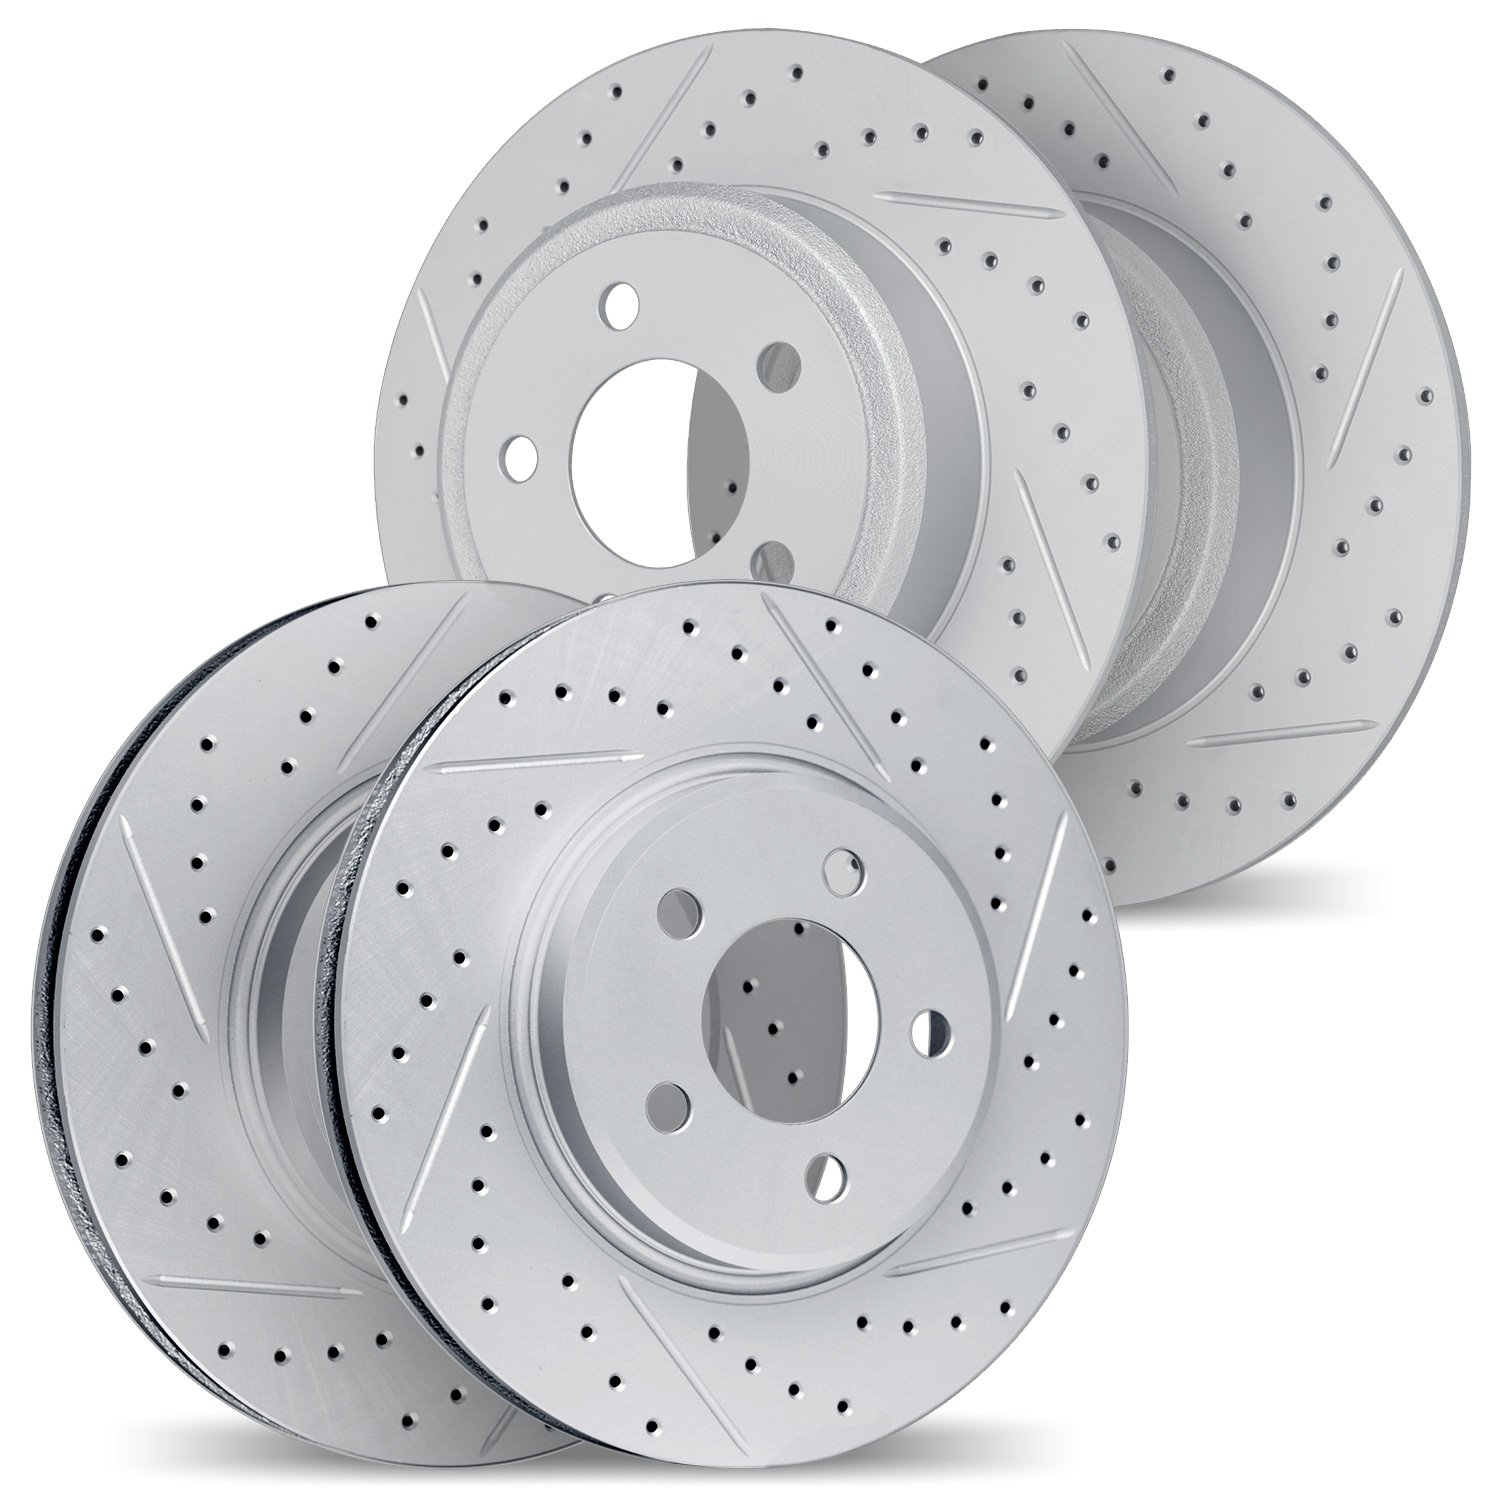 2004-59072 Geoperformance Drilled/Slotted Brake Rotors, 2000-2009 Acura/Honda, Position: Front and Rear